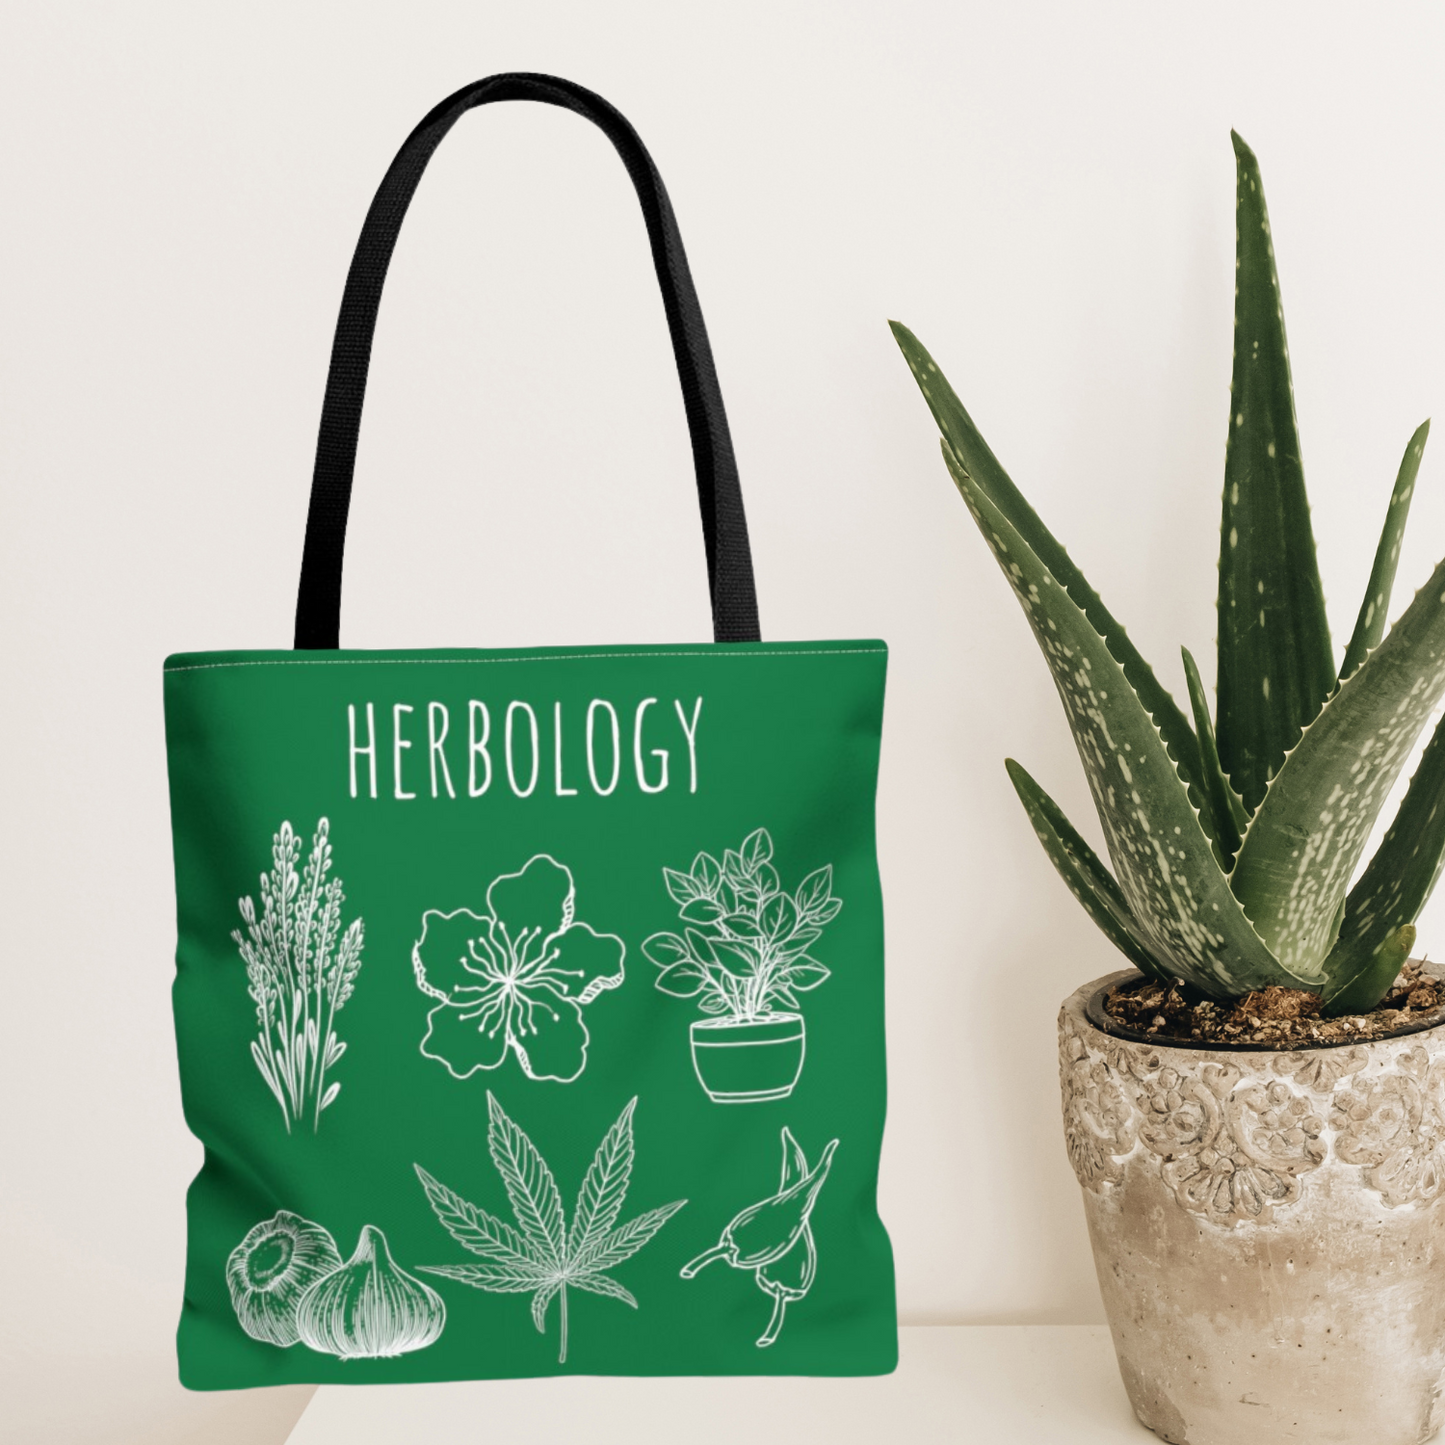 Herbology Tote Bag (Magical Studies Collection)